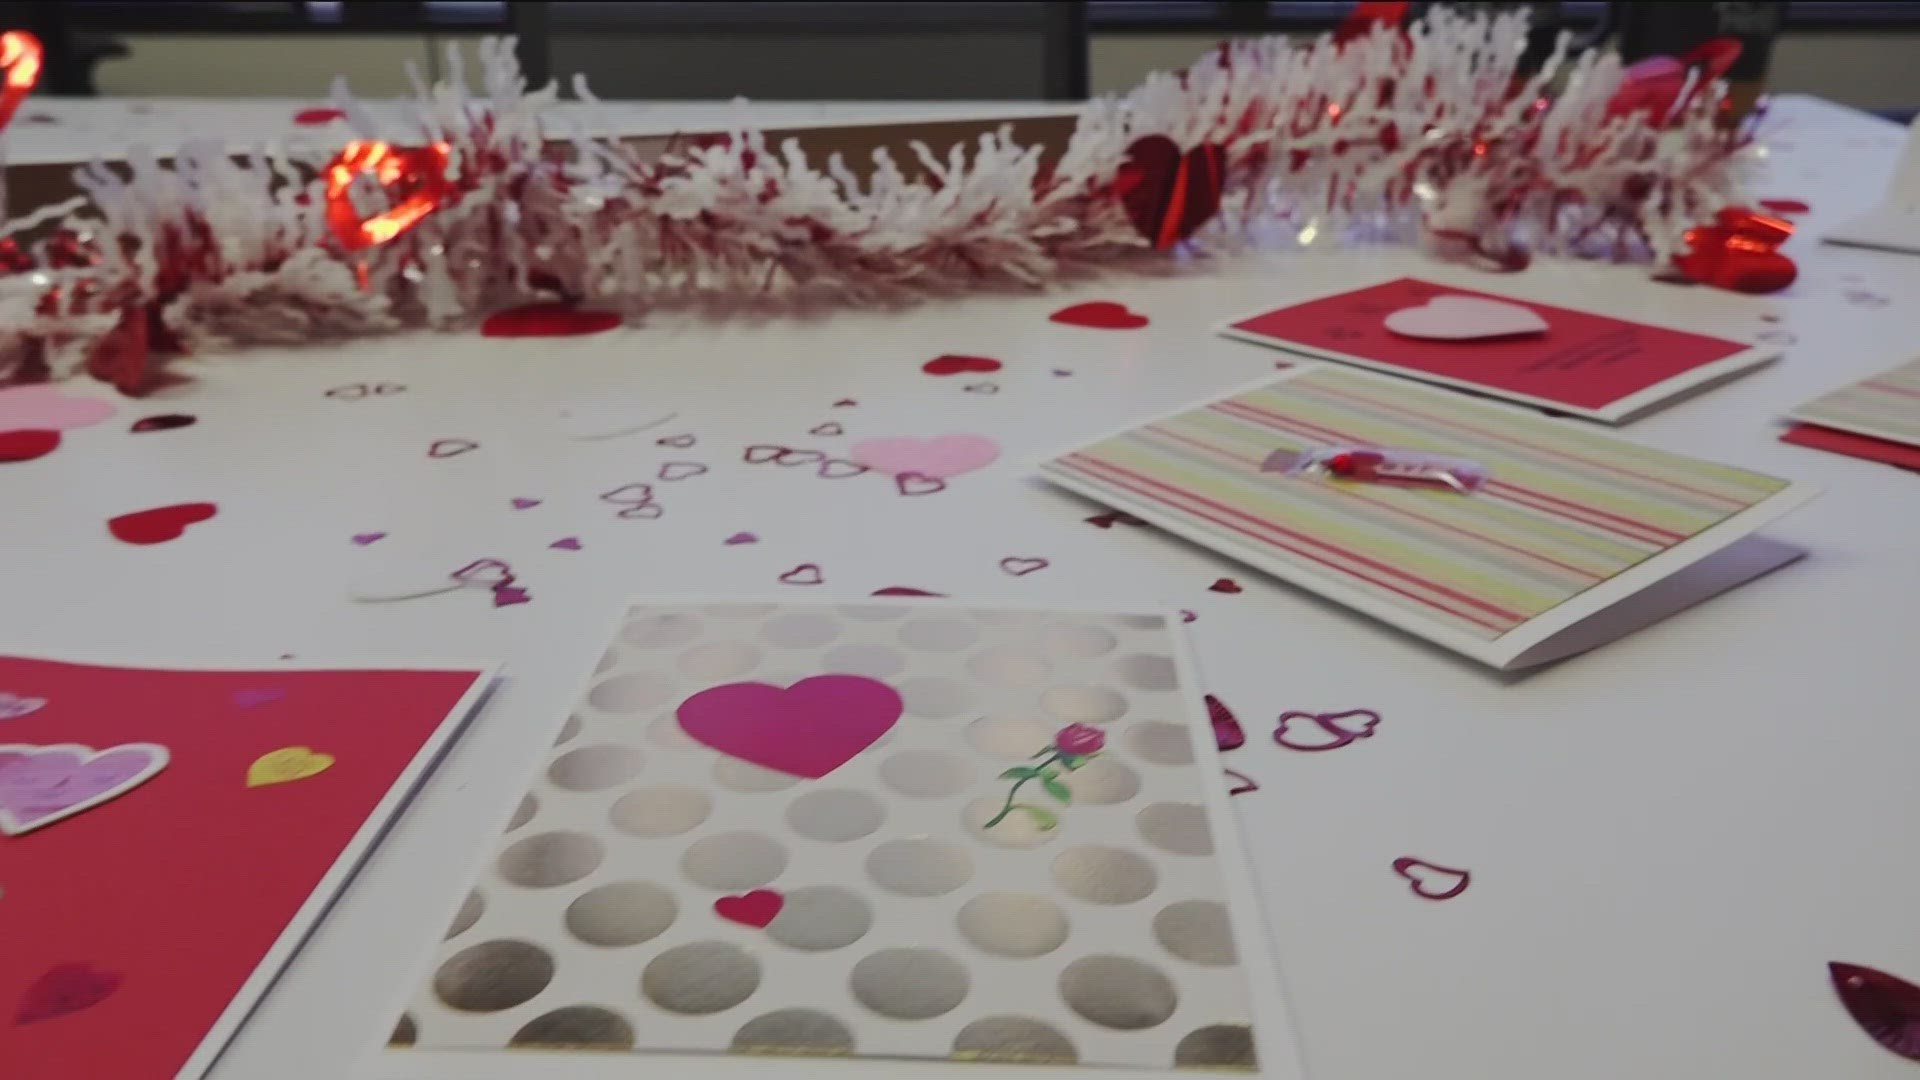 Senior Helpers launched a card drive to deliver some love to local seniors for Valentine's Day.